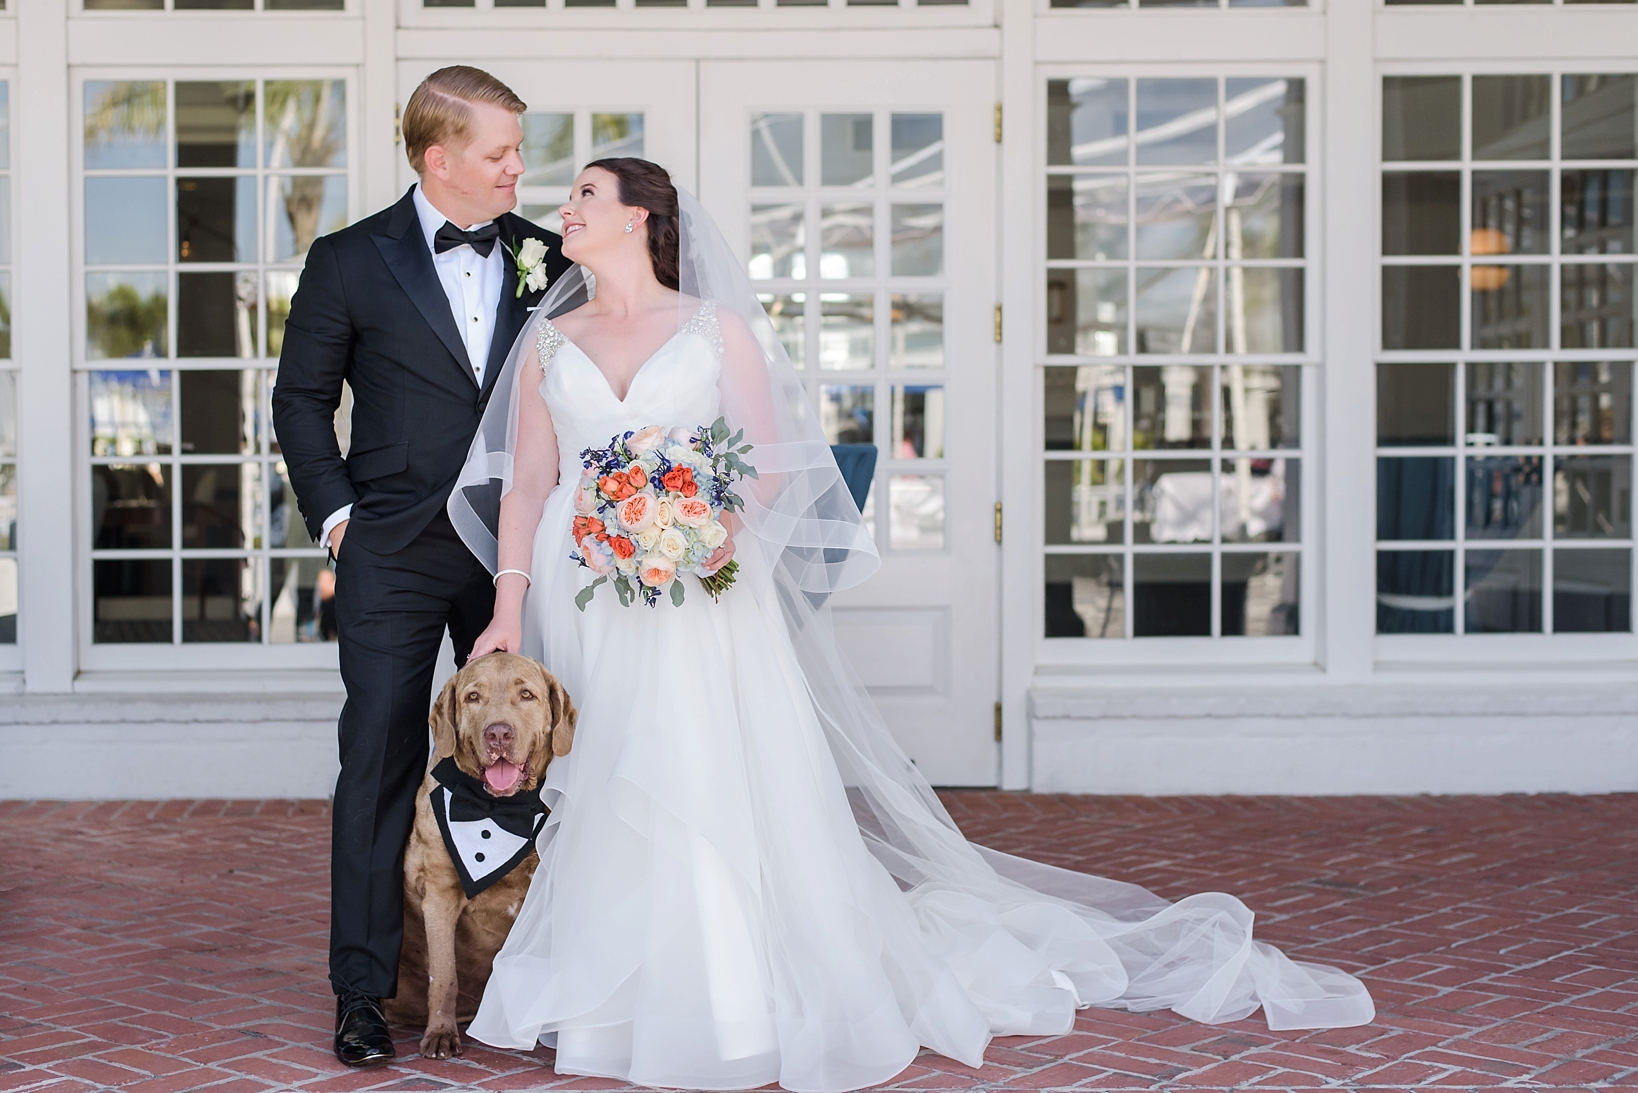 Bride and Groom pose with their dog on their wedding day